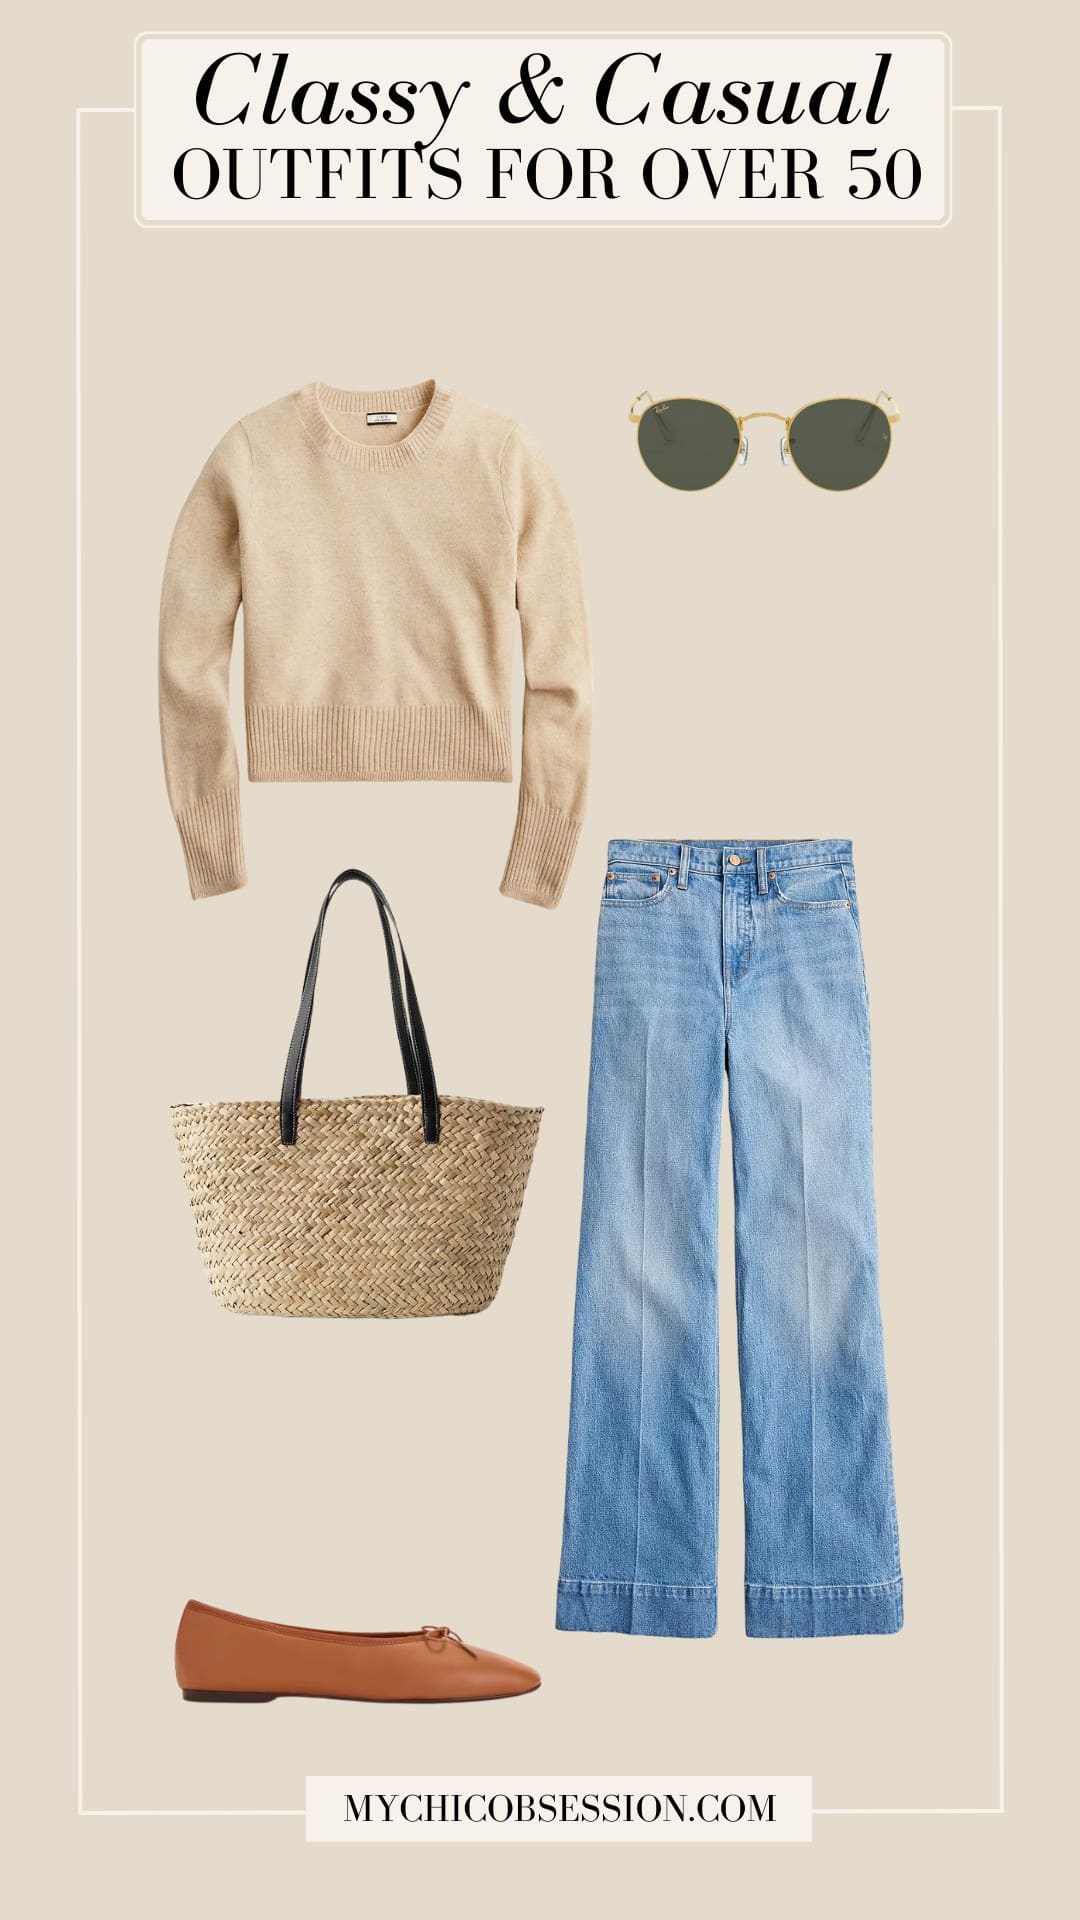 classy casual outfit for ladies over 50 - cashmere sweater jeans straw tote sunglasses